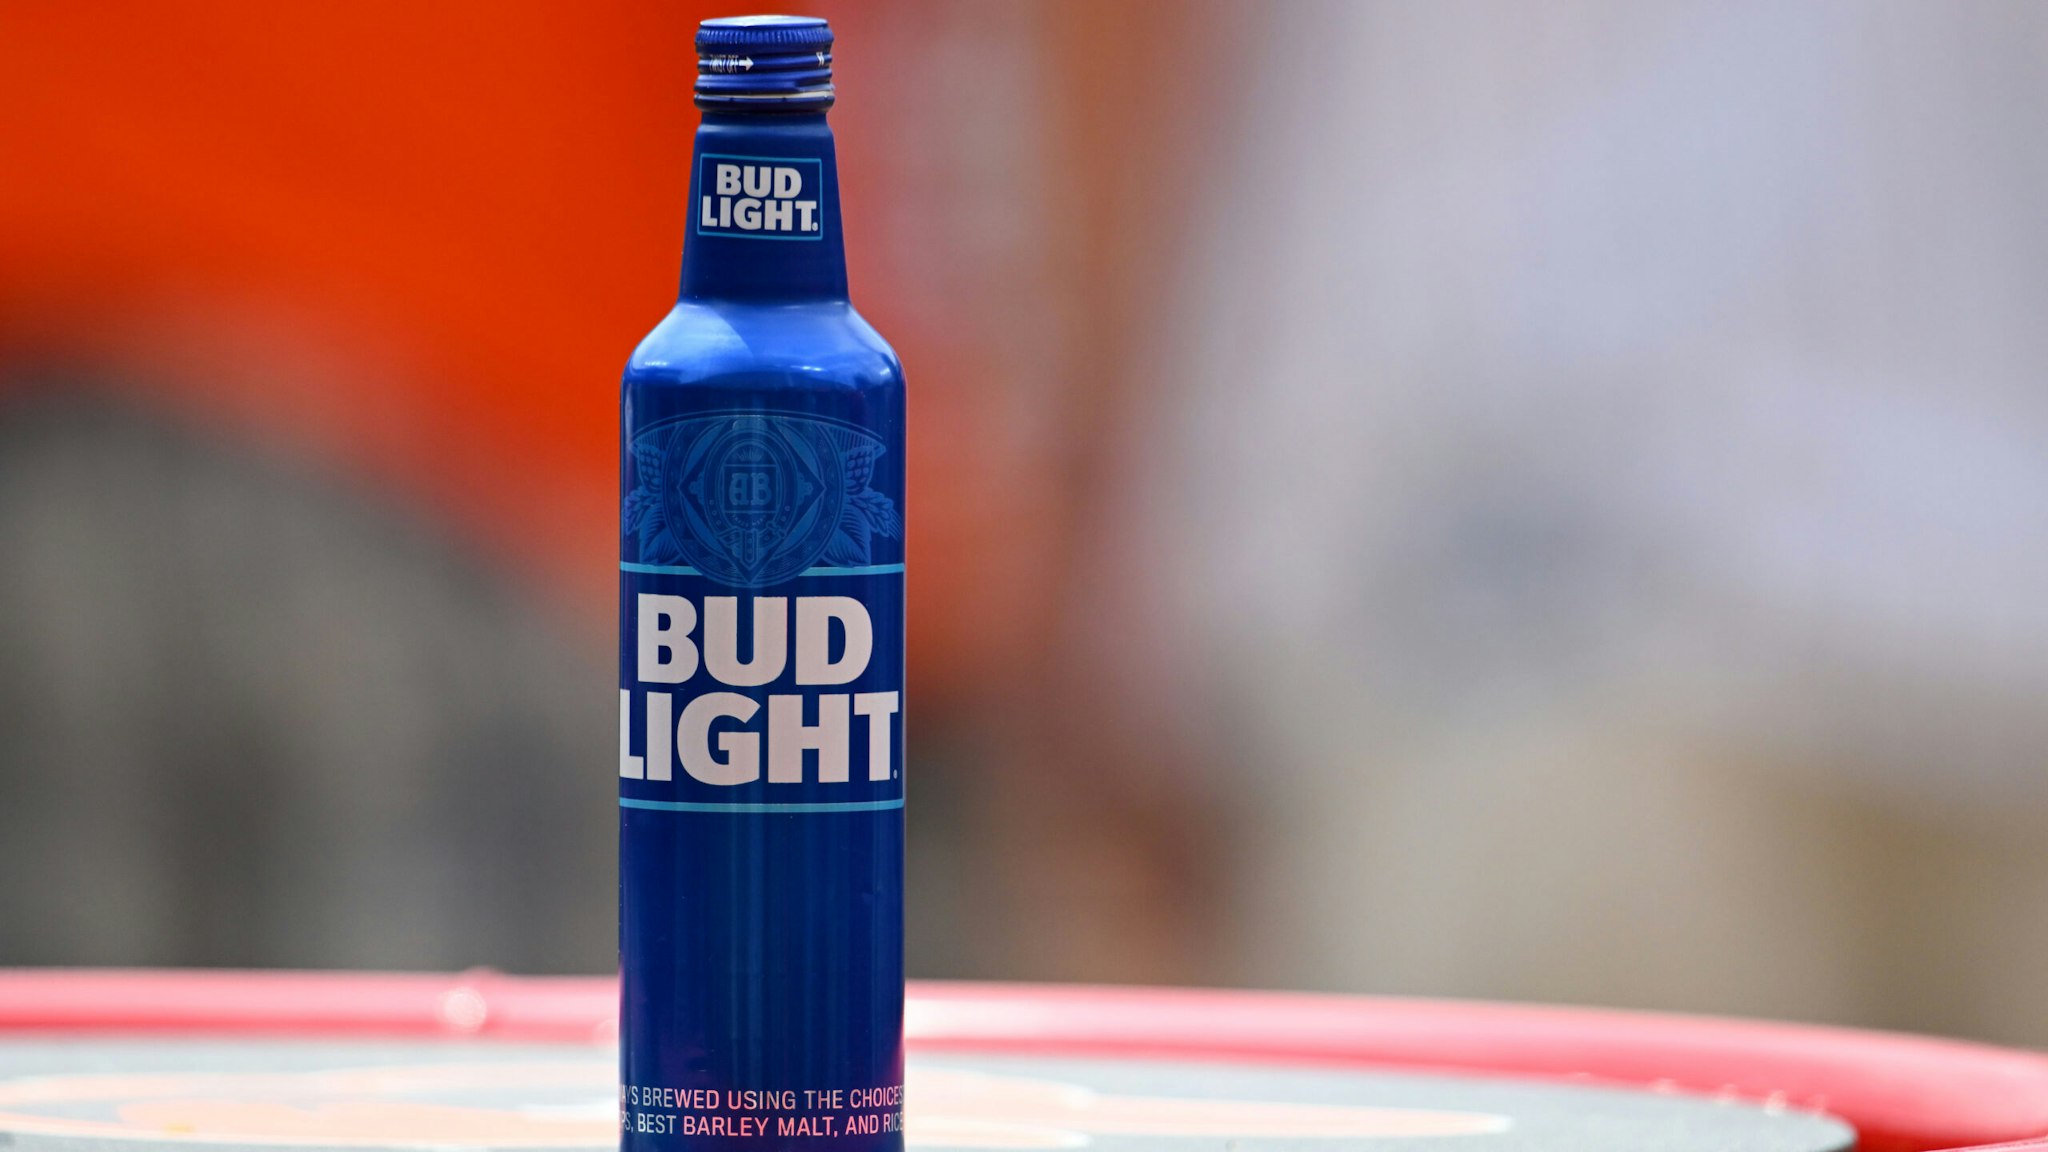 BALTIMORE, MARYLAND - JUNE 11: A view of a Bud Light bottle on a table at the baseball game between the Baltimore Orioles and the Kansas City Royals at Oriole Park at Camden Yards on June 11, 2023 in Baltimore, Maryland.